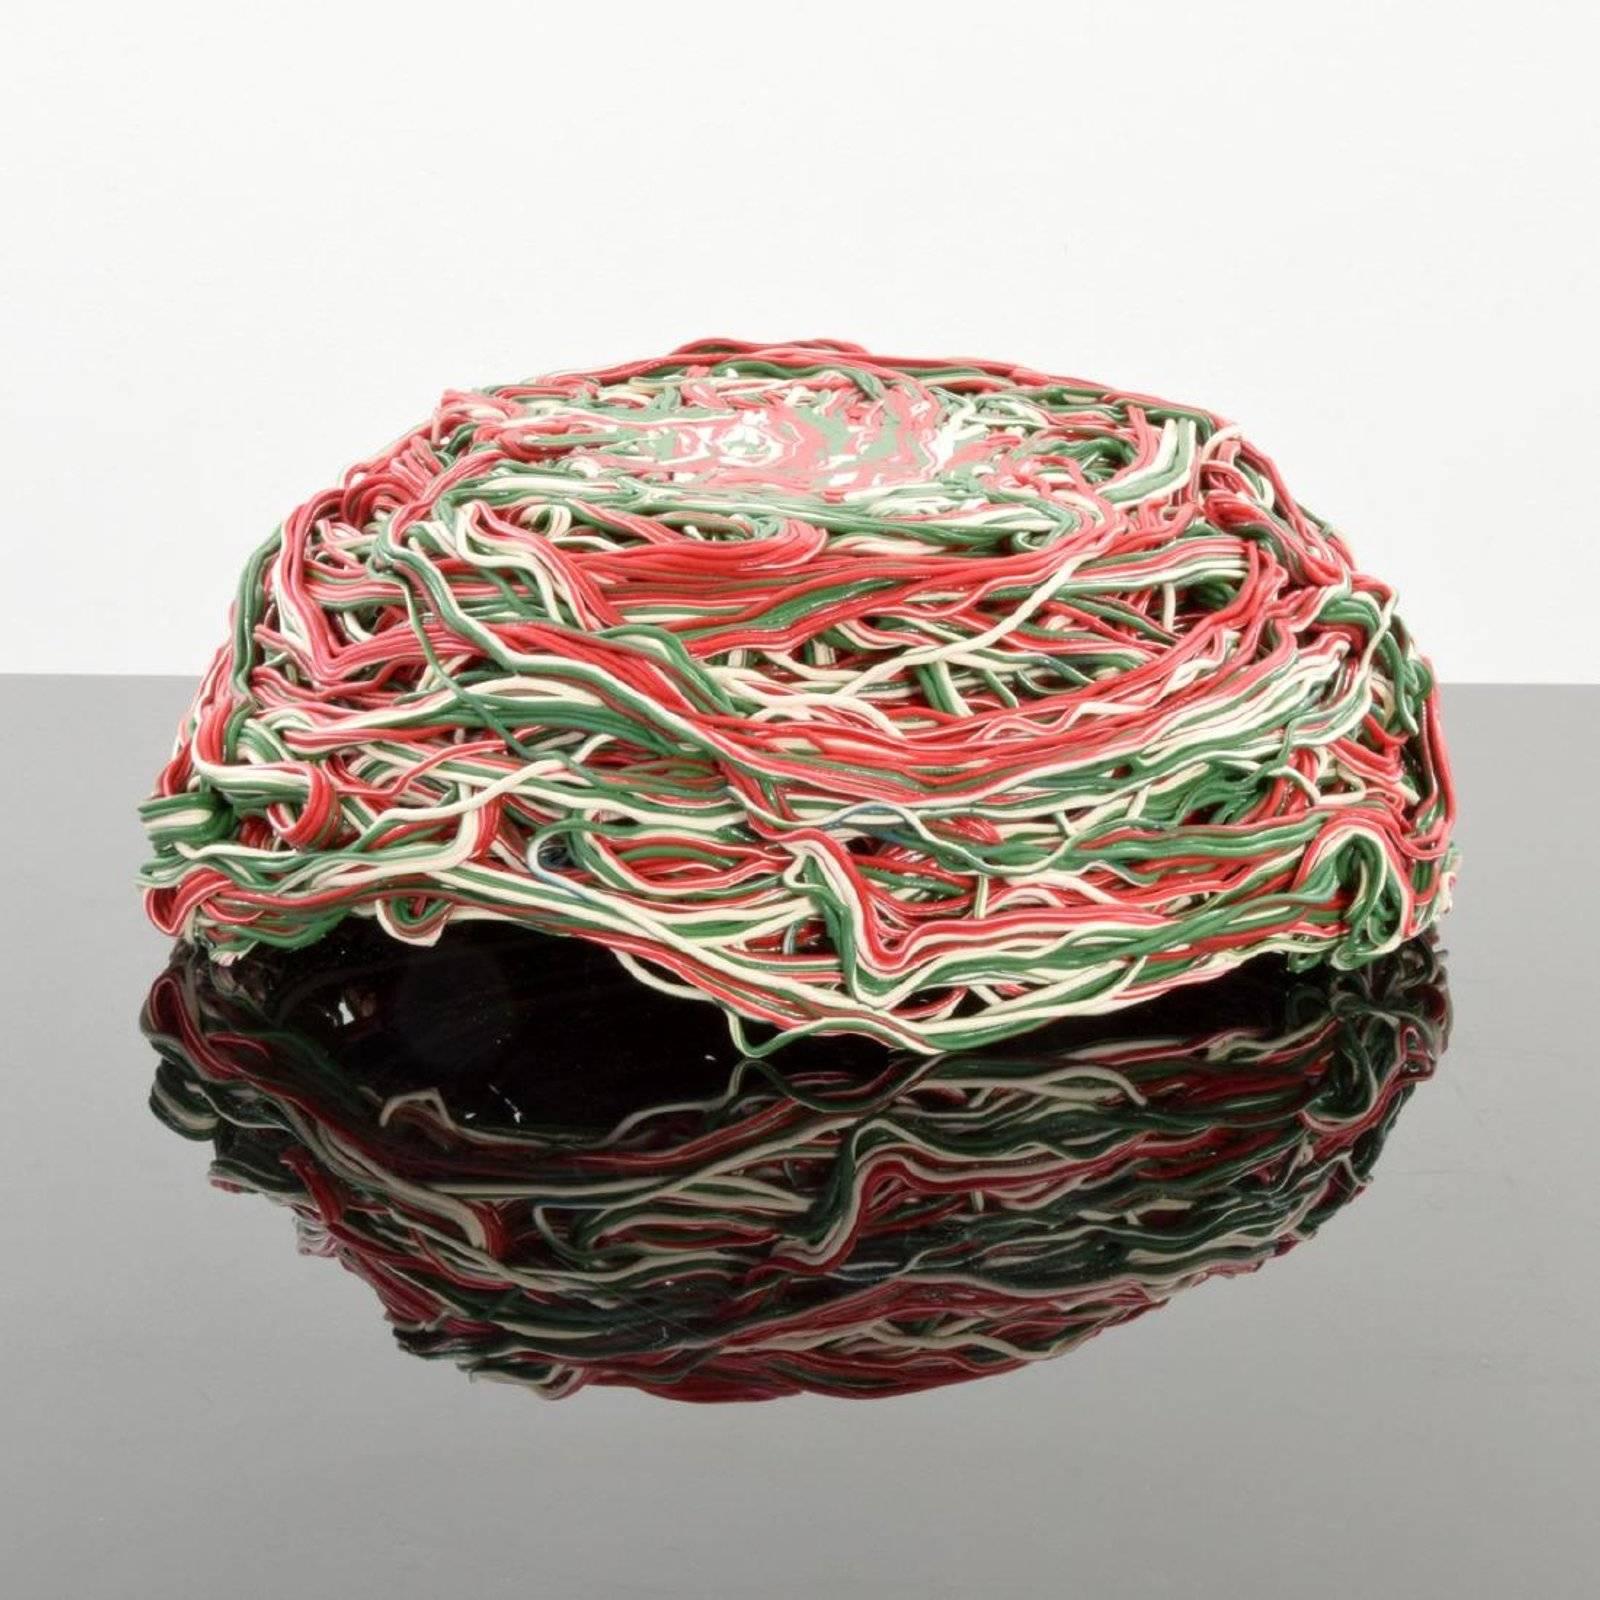 Large Gaetano Pesce Spaghetti Bowl/Basket In Good Condition For Sale In West Palm Beach, FL